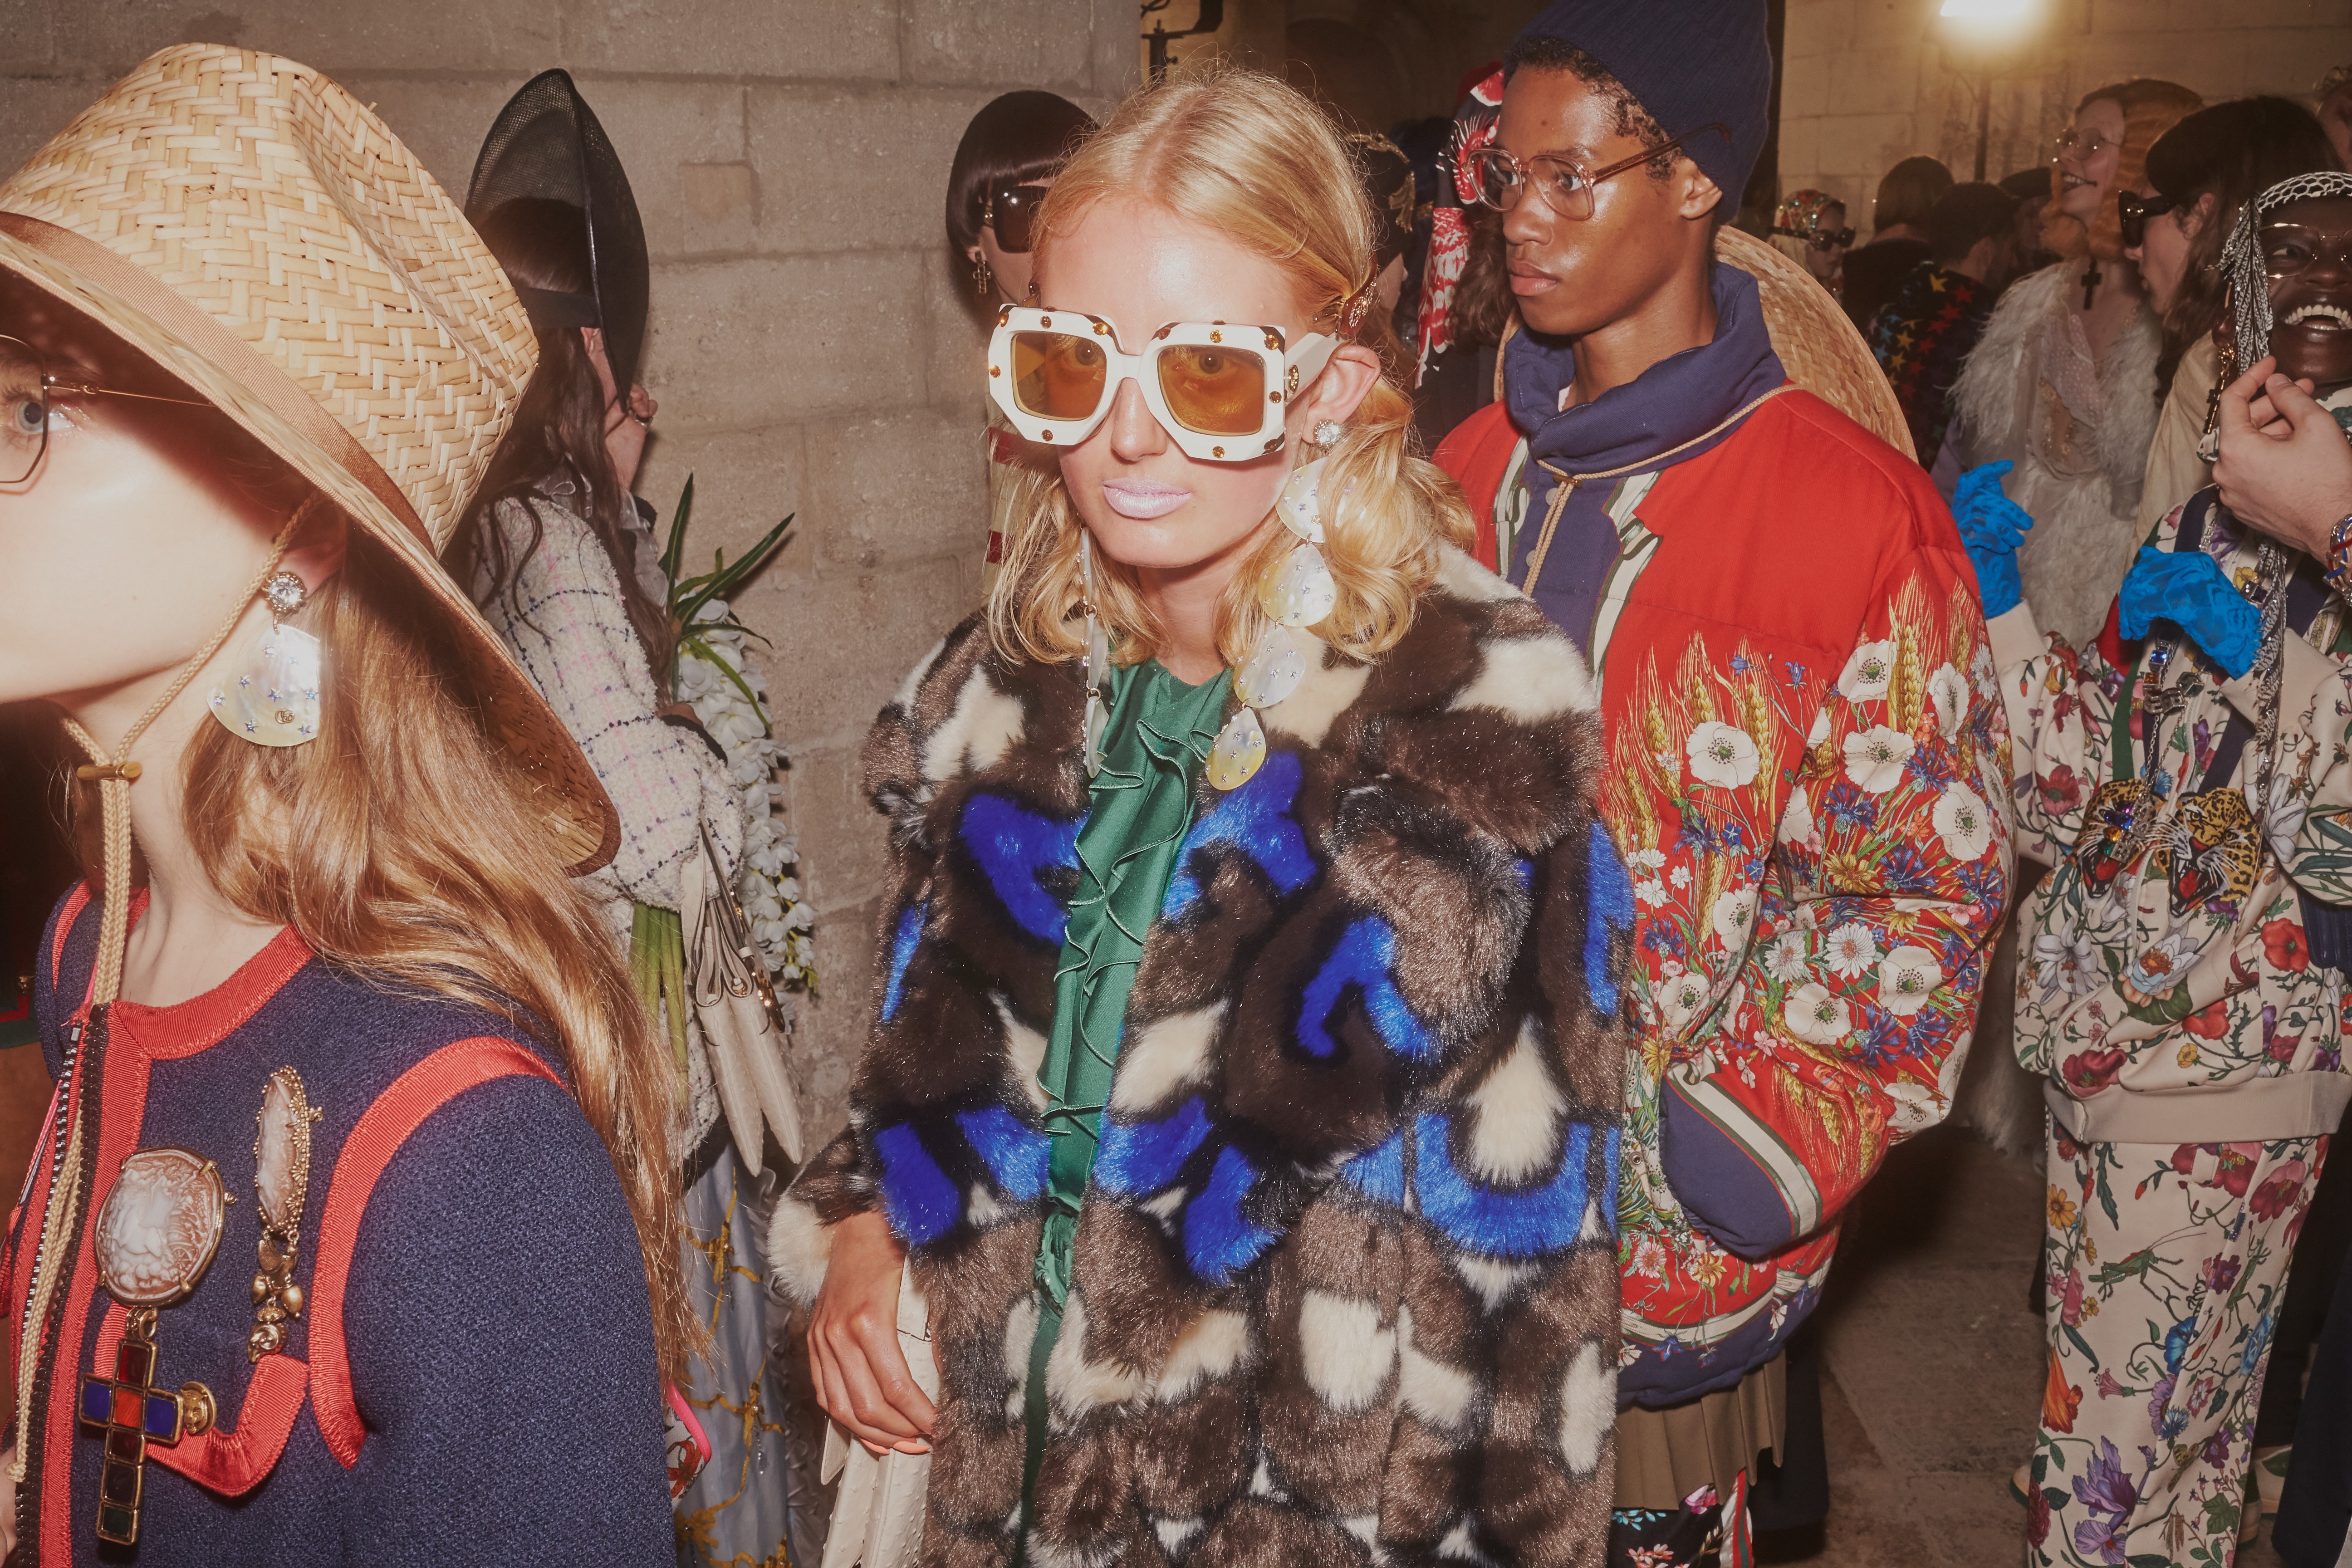 How a century-old luxury brand like Gucci won over Gen Z